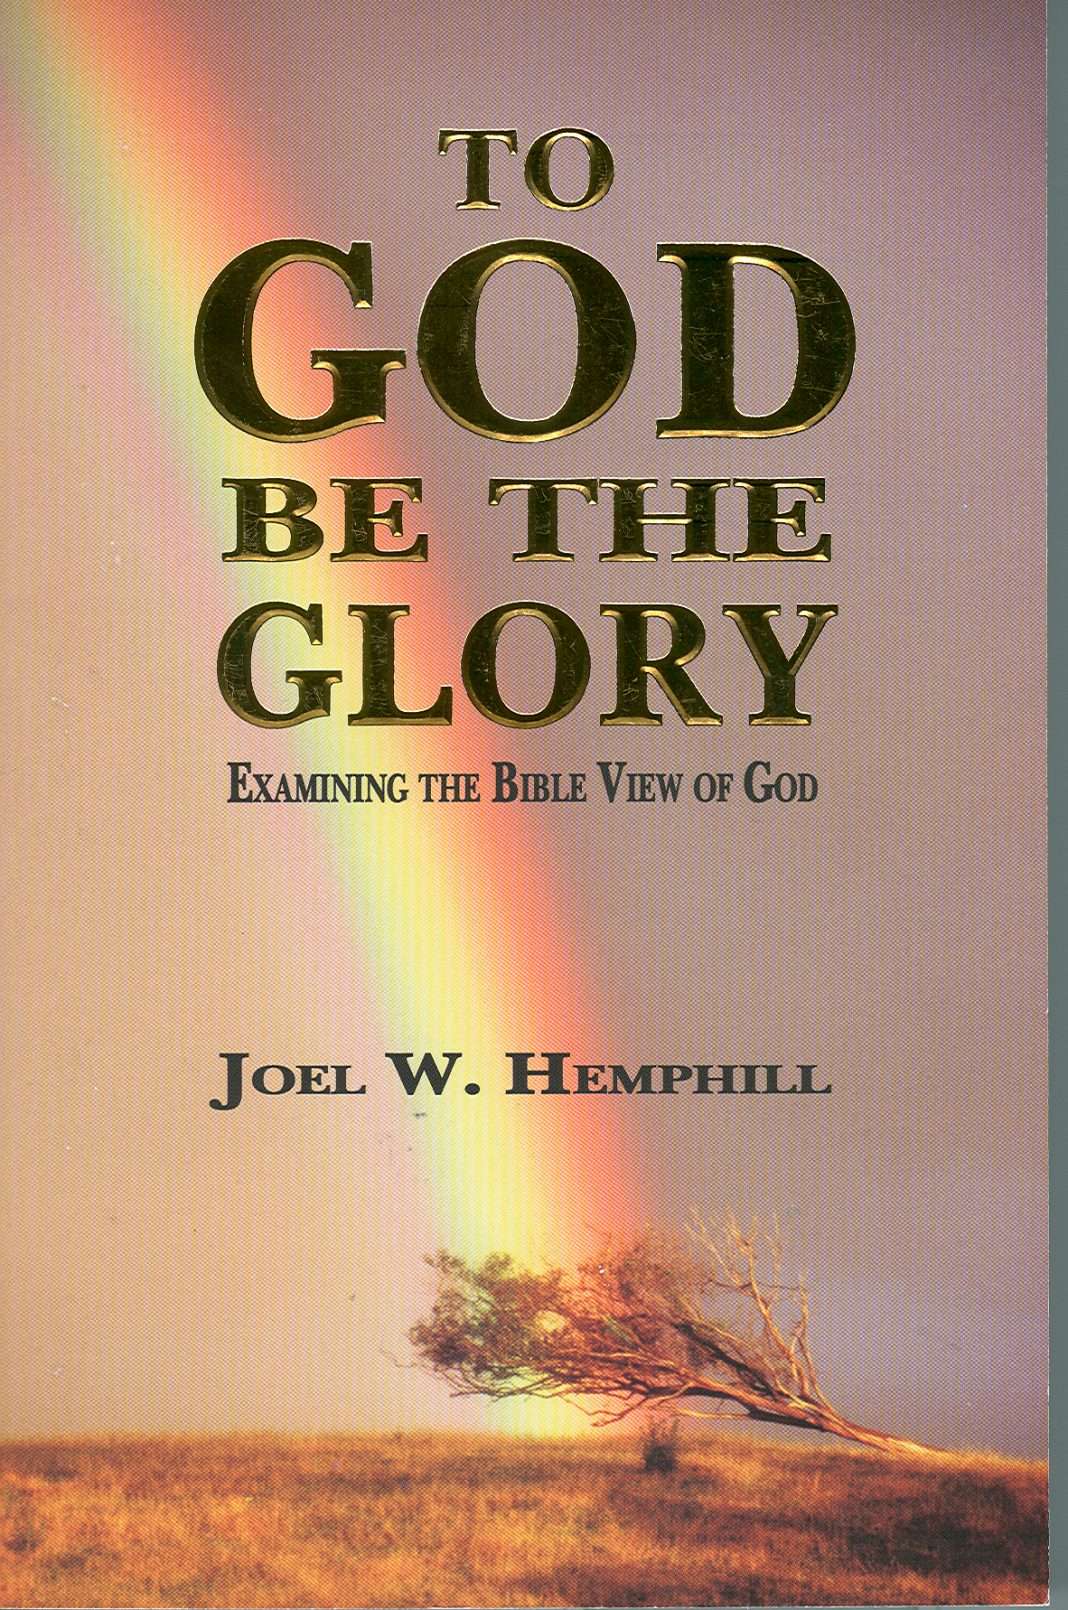 What Is The Glory Of God According To The Bible Bible Talk Club